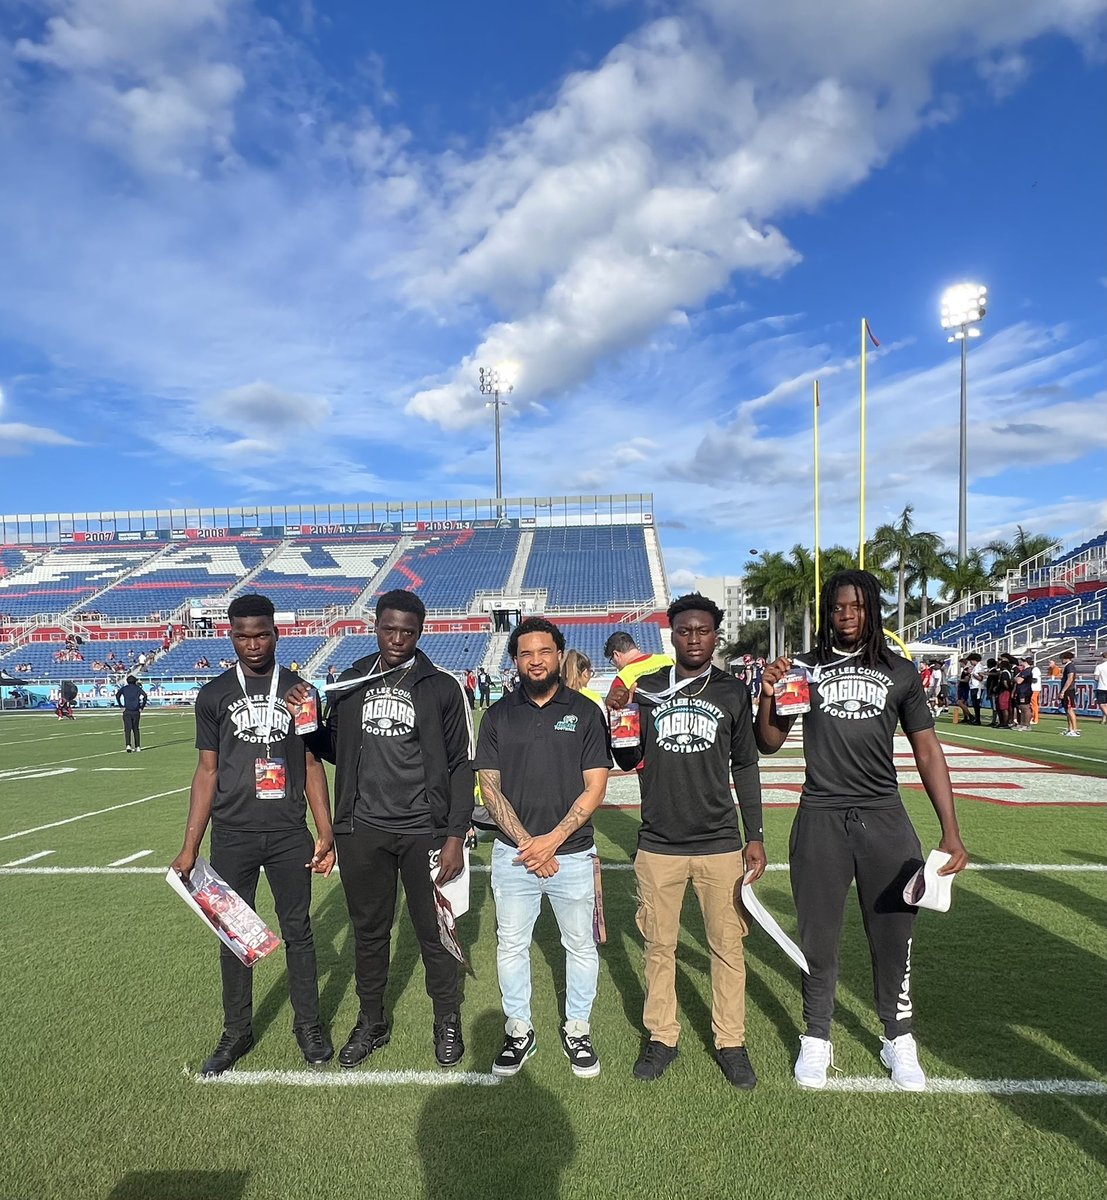 Had a great time at FAU! What an experience for my guys’ first college game ‼️ Thank you for your hospitality 💯 @chadlunsford @CoachTaggart @CoachWoodie @coachdavidkelly @coach_pimp